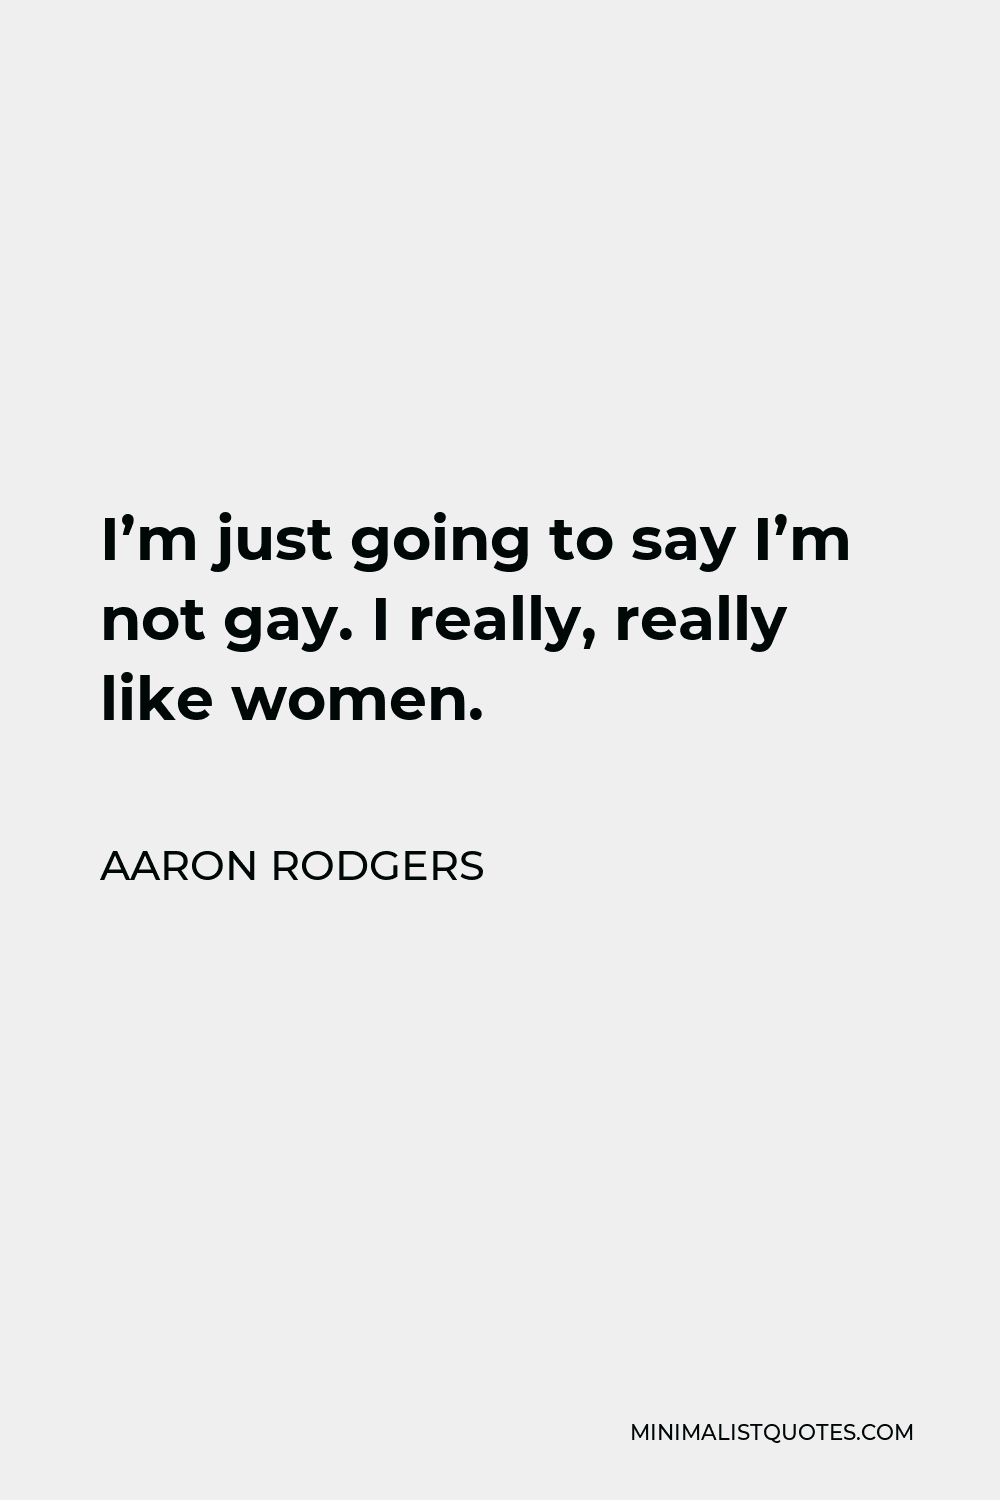 Aaron Rodgers Quote - I’m just going to say I’m not gay. I really, really like women.